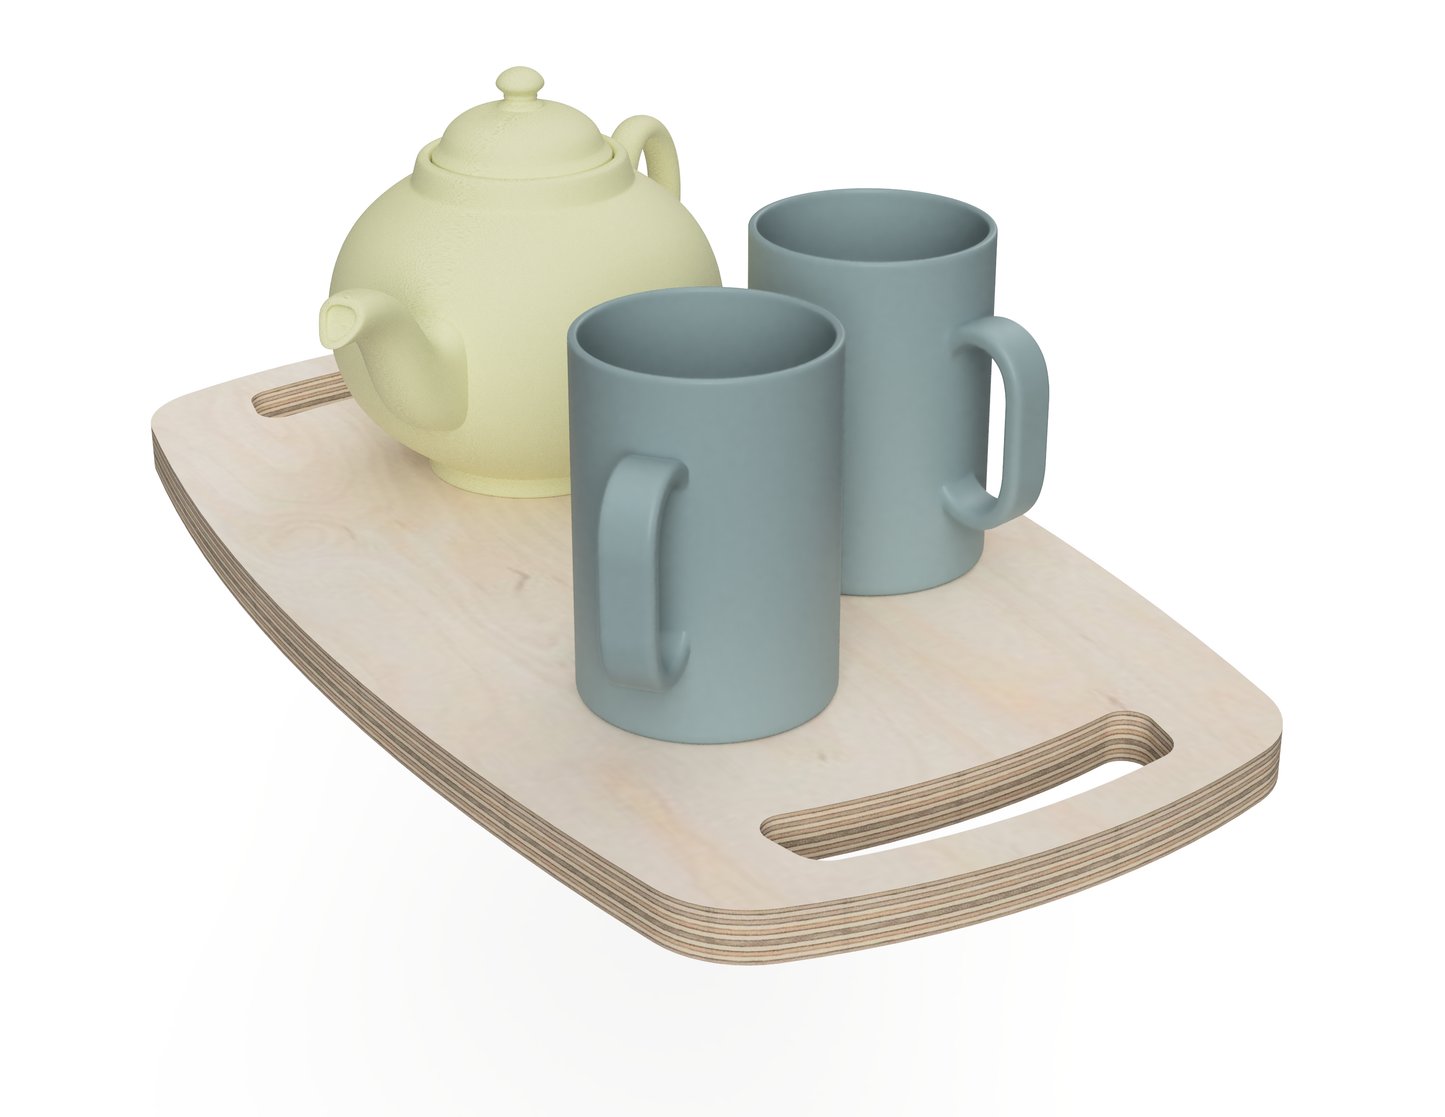 Minimalistic Serving Tray DXF Files